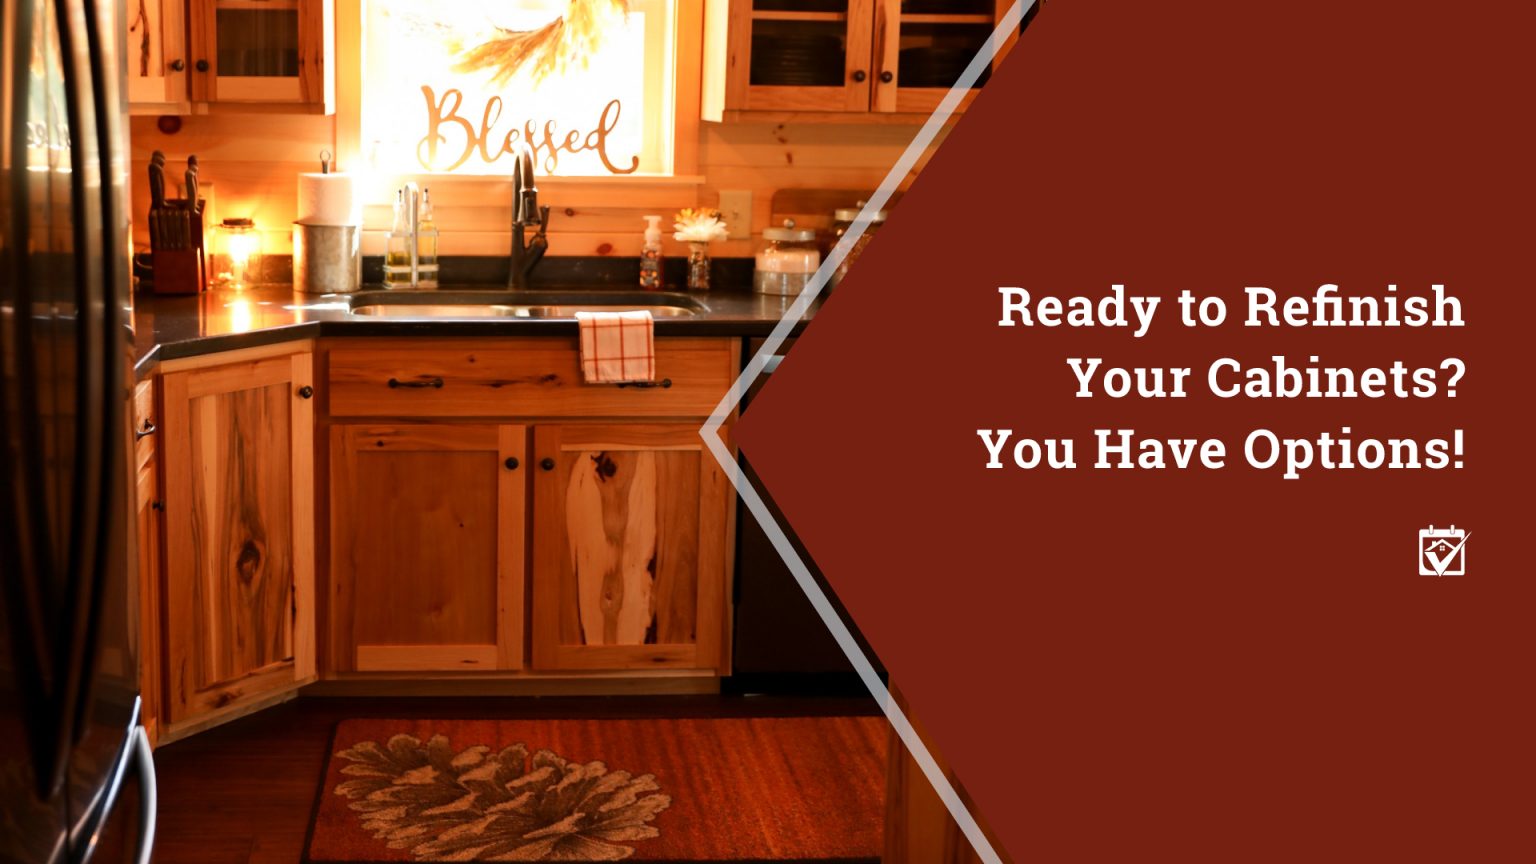 Looking to Refinish Your Cabinets?